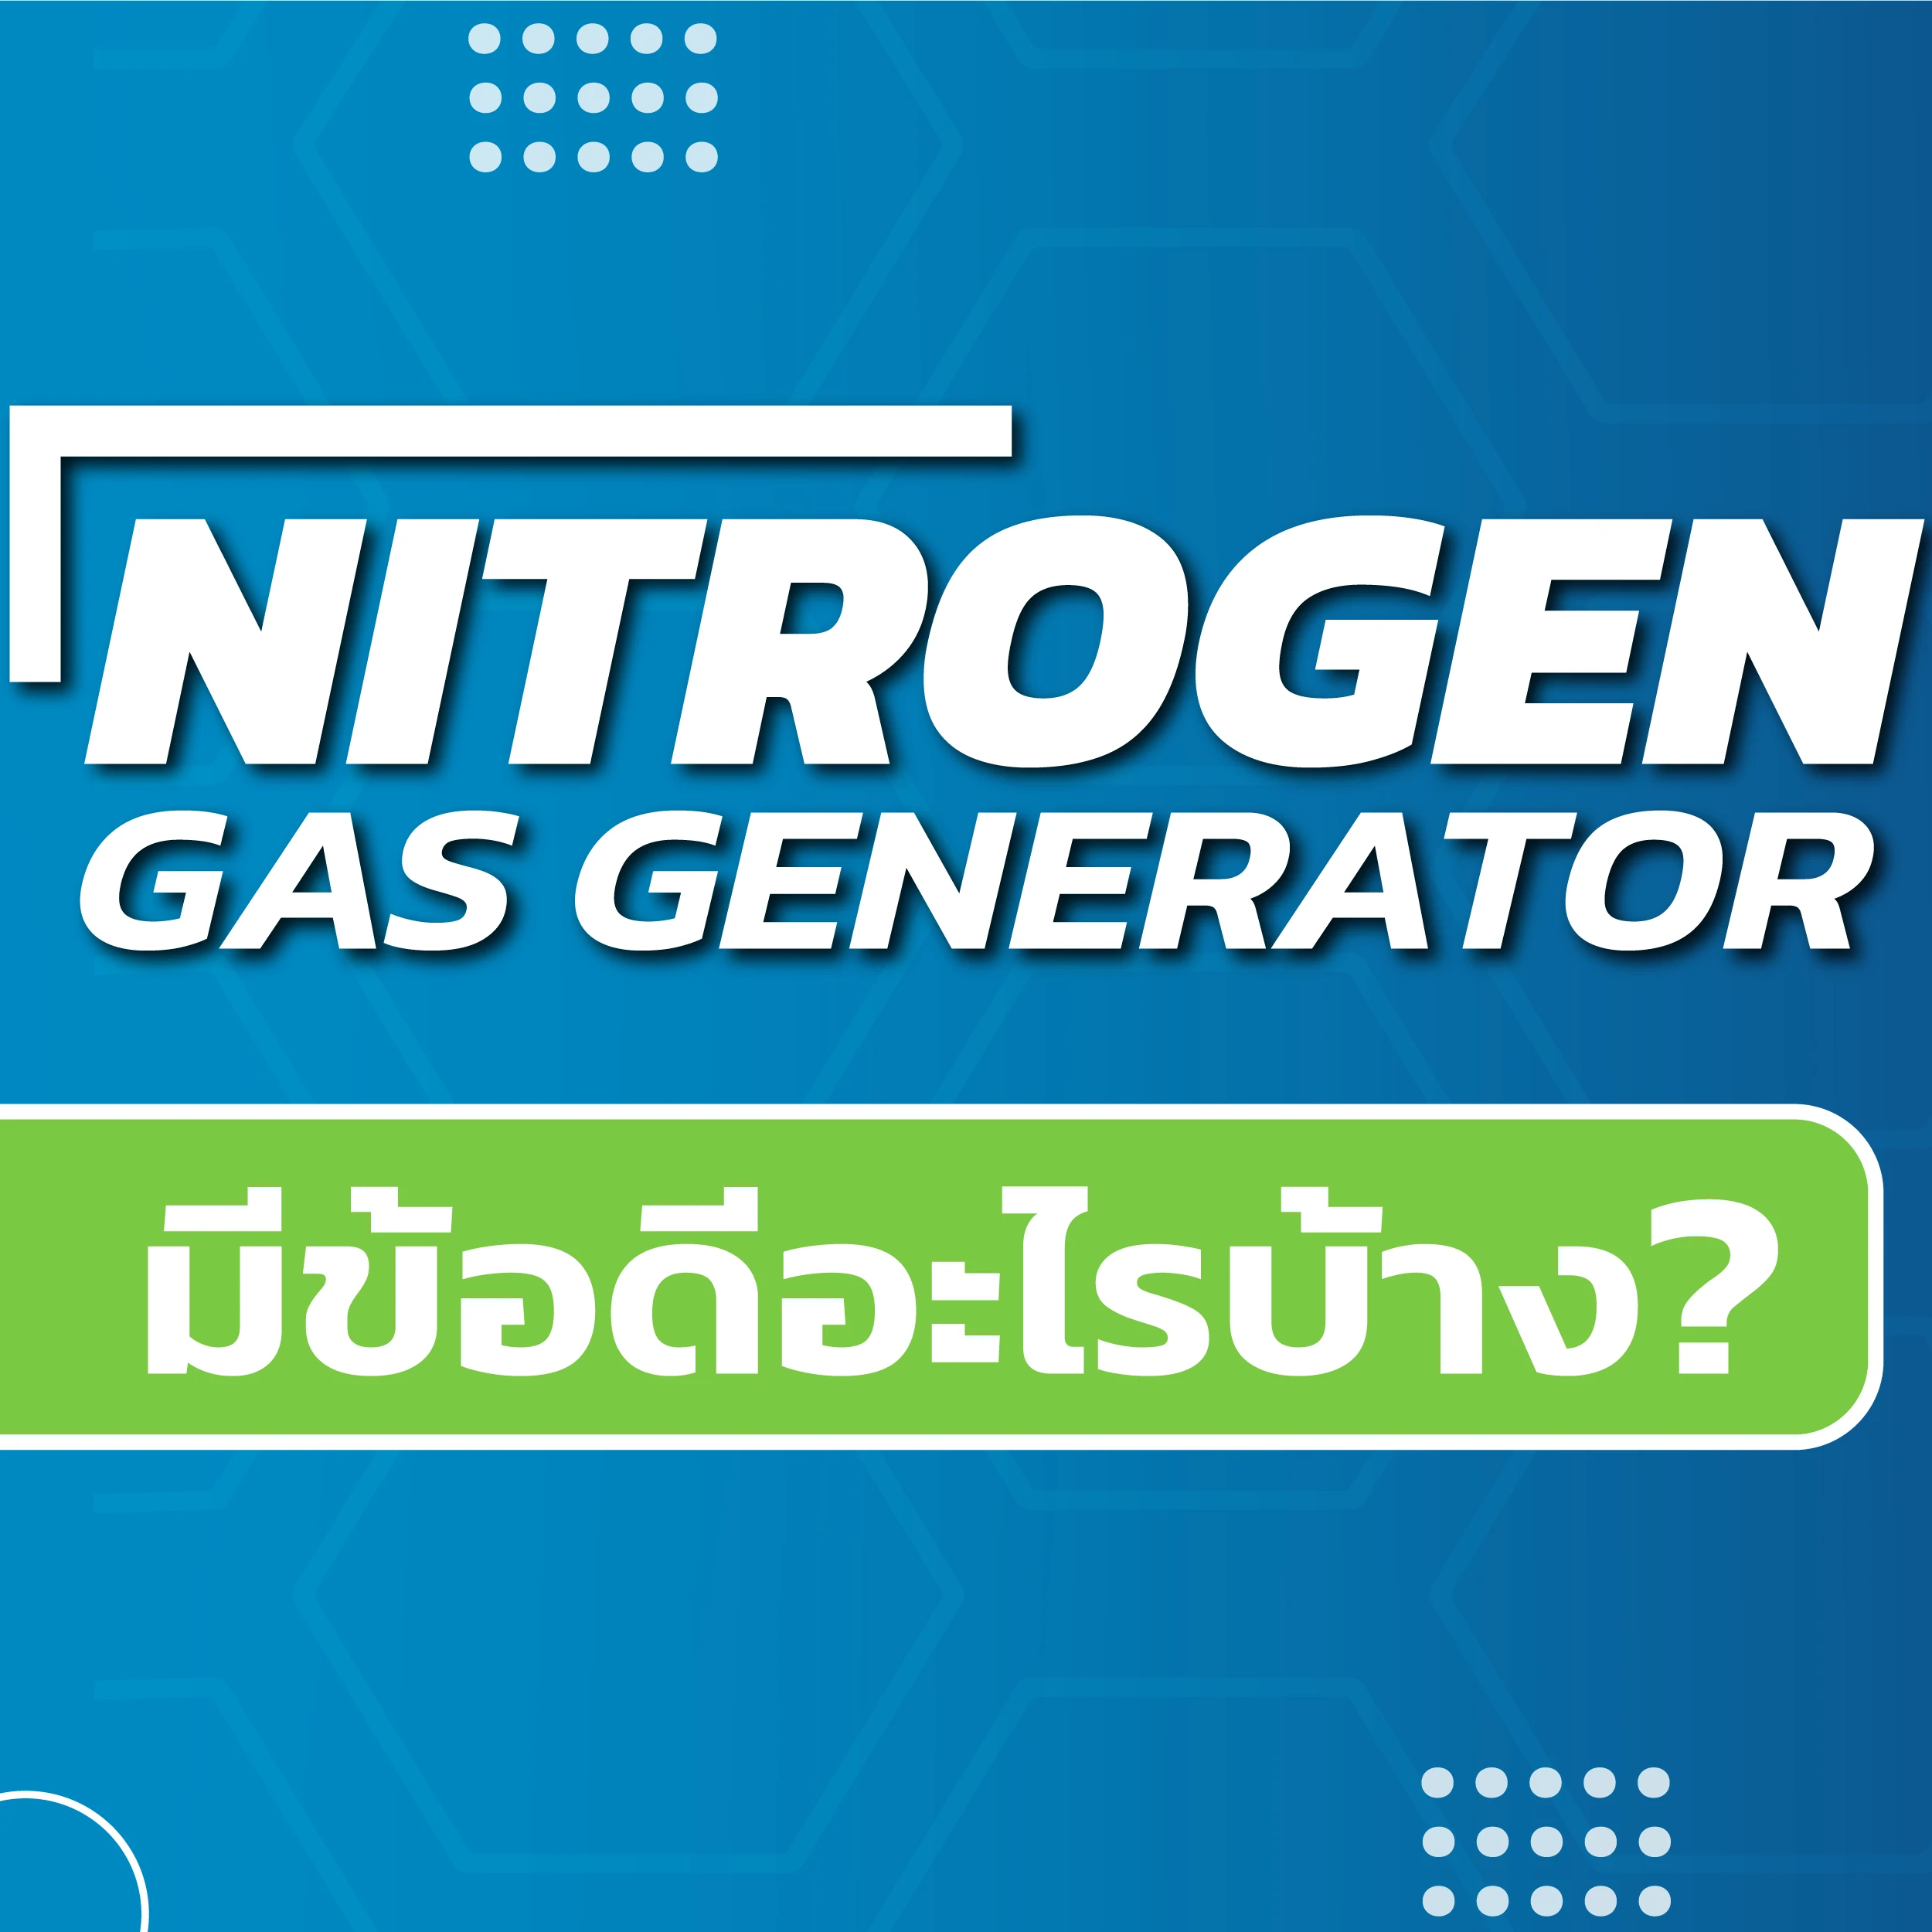 nitrogen generator What are the advantages?